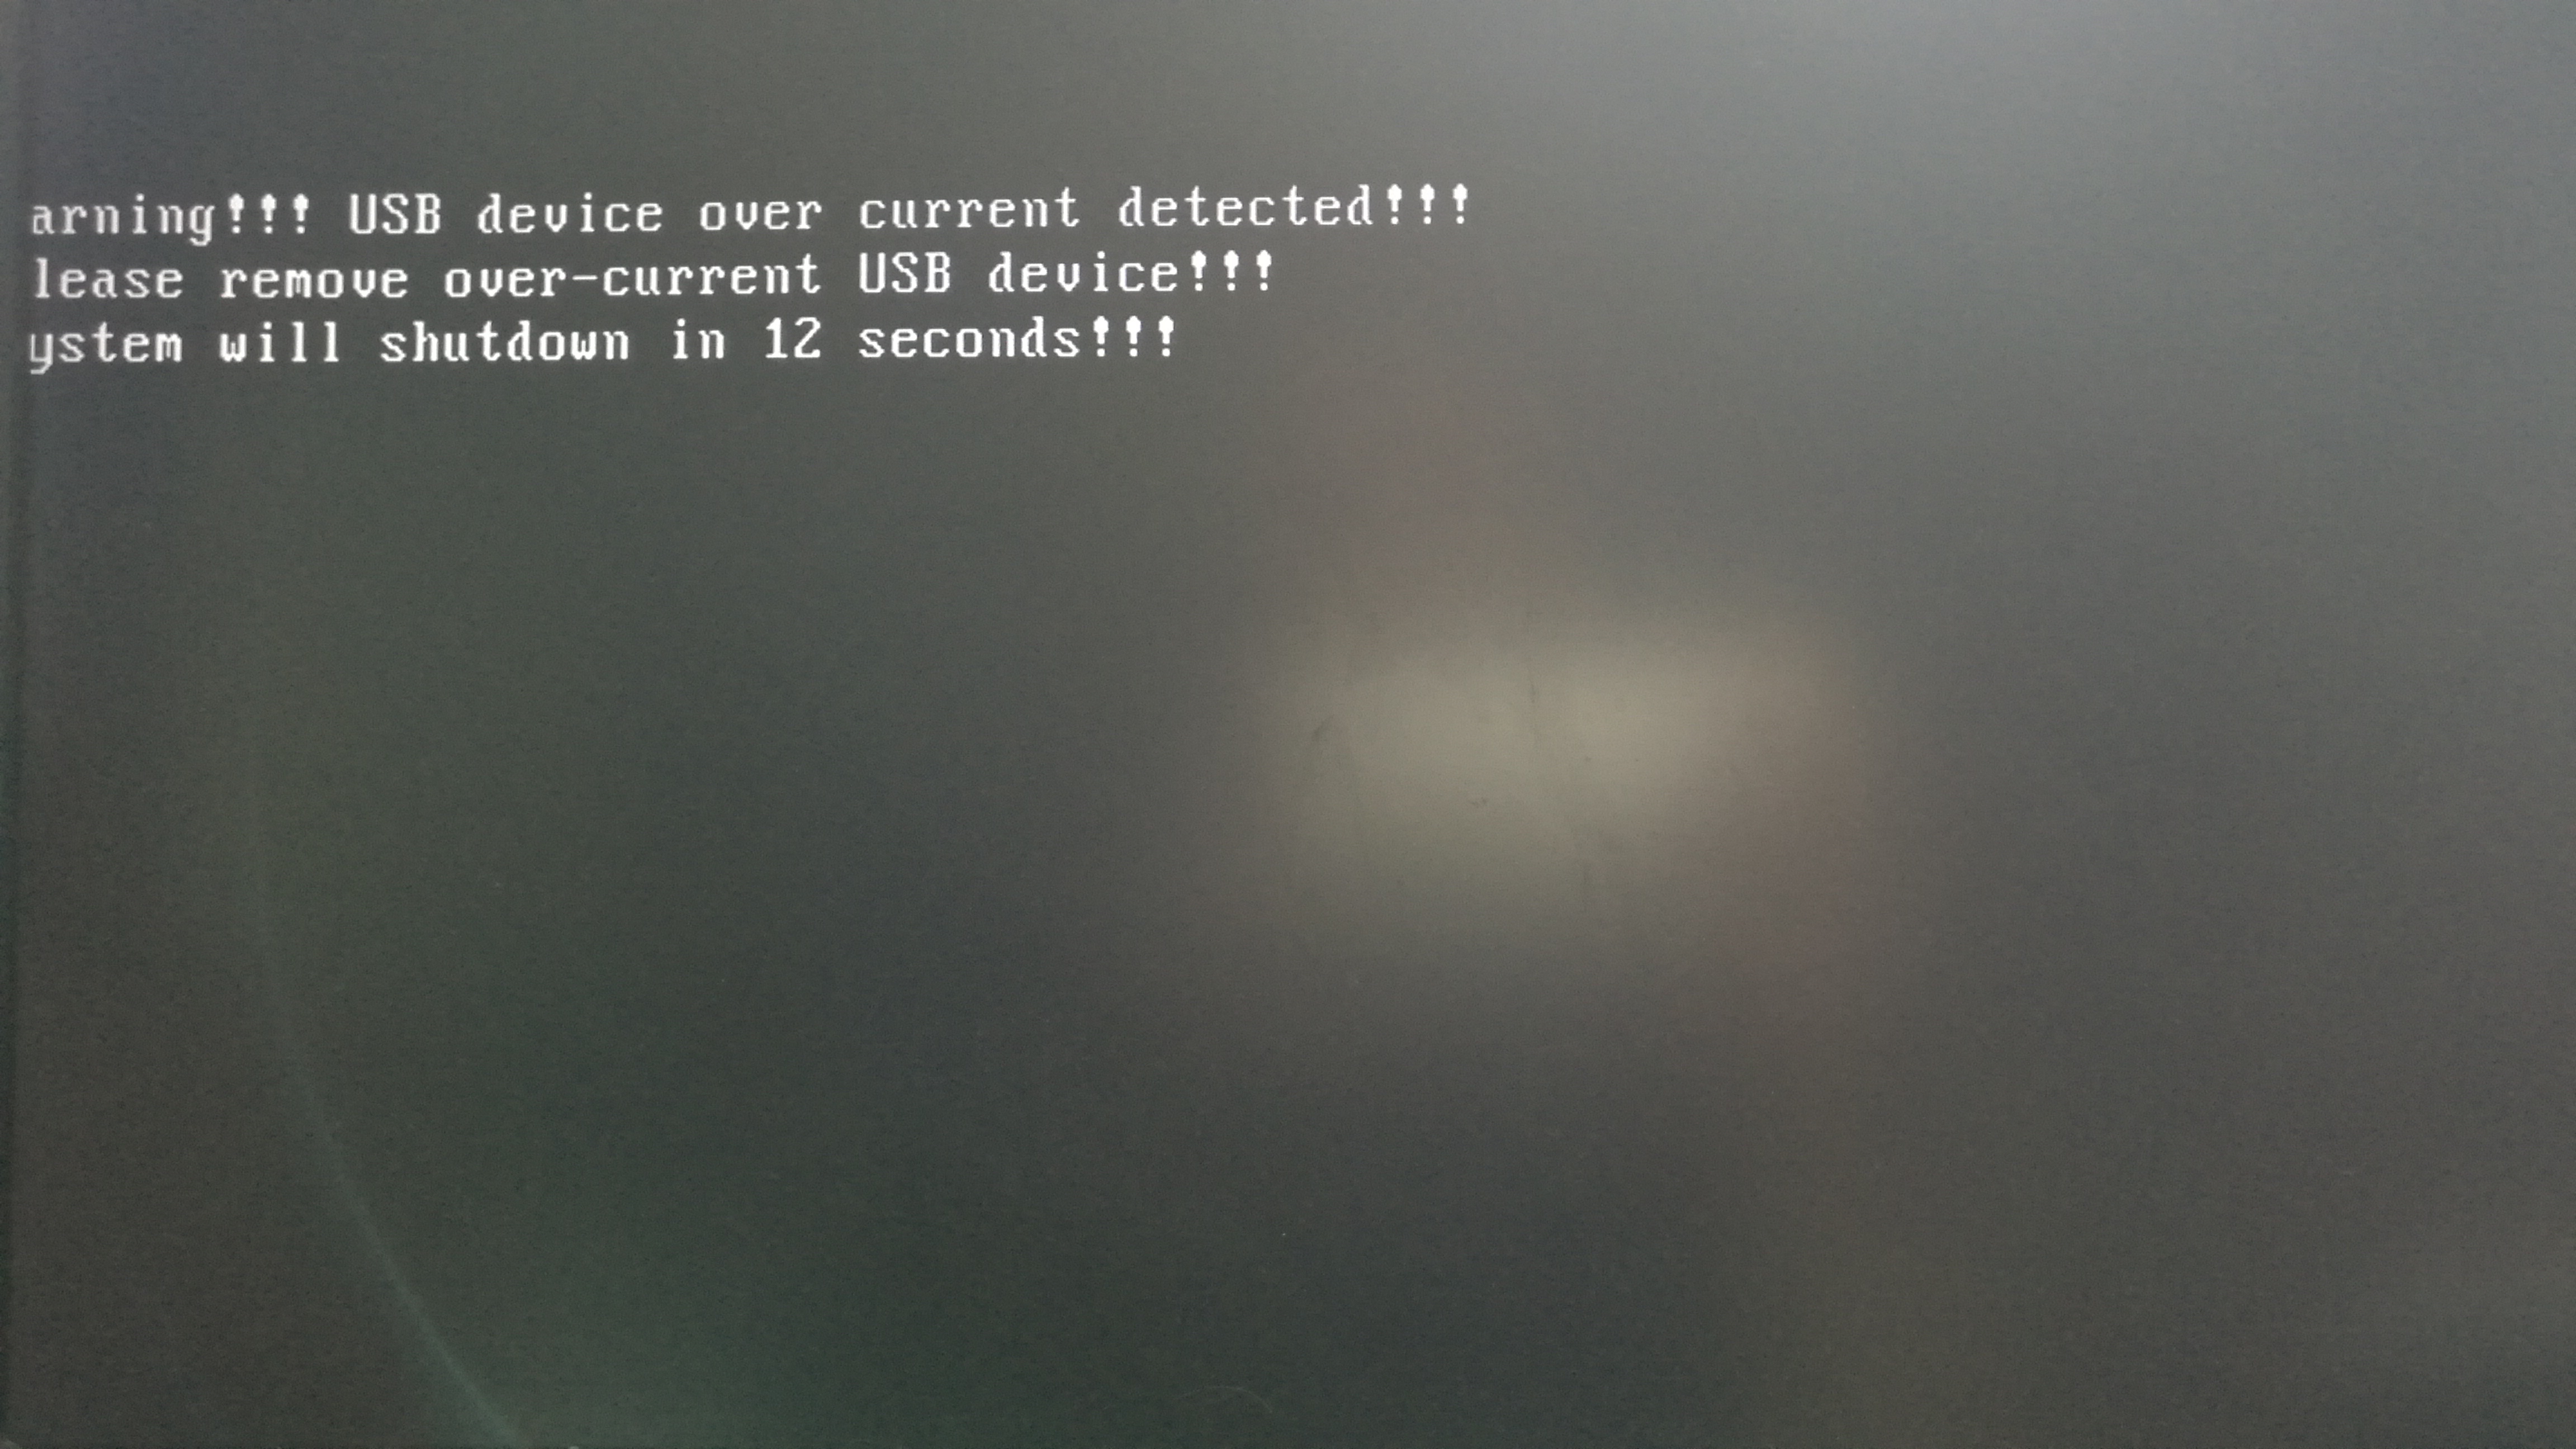 Usb device over current status. USB device over current status detected.